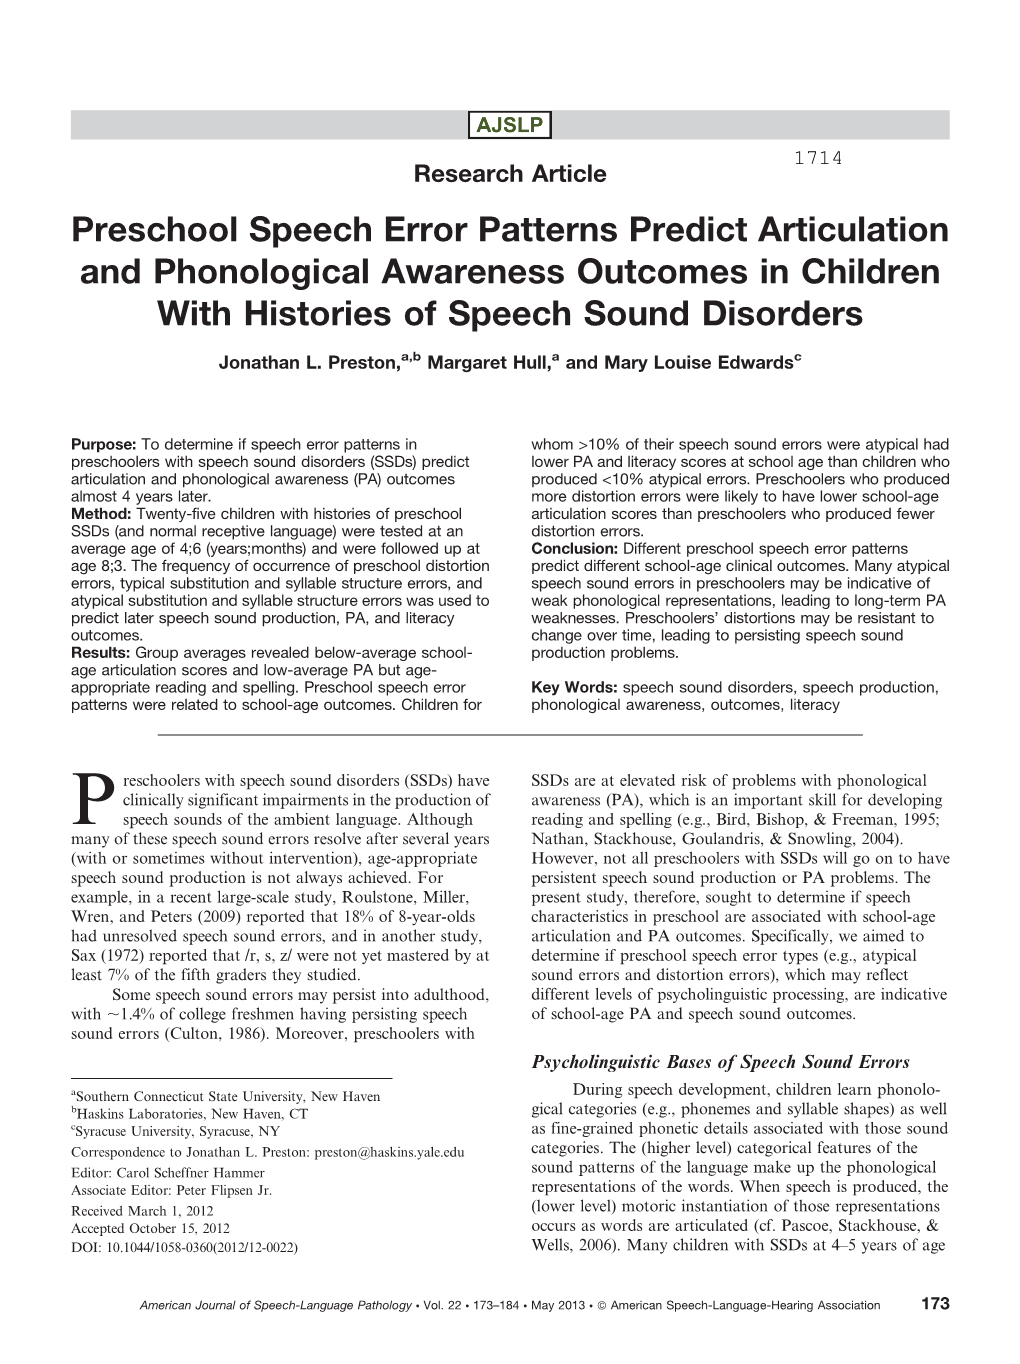 Preschool Speech Error Patterns Predict Articulation and Phonological Awareness Outcomes in Children with Histories of Speech Sound Disorders